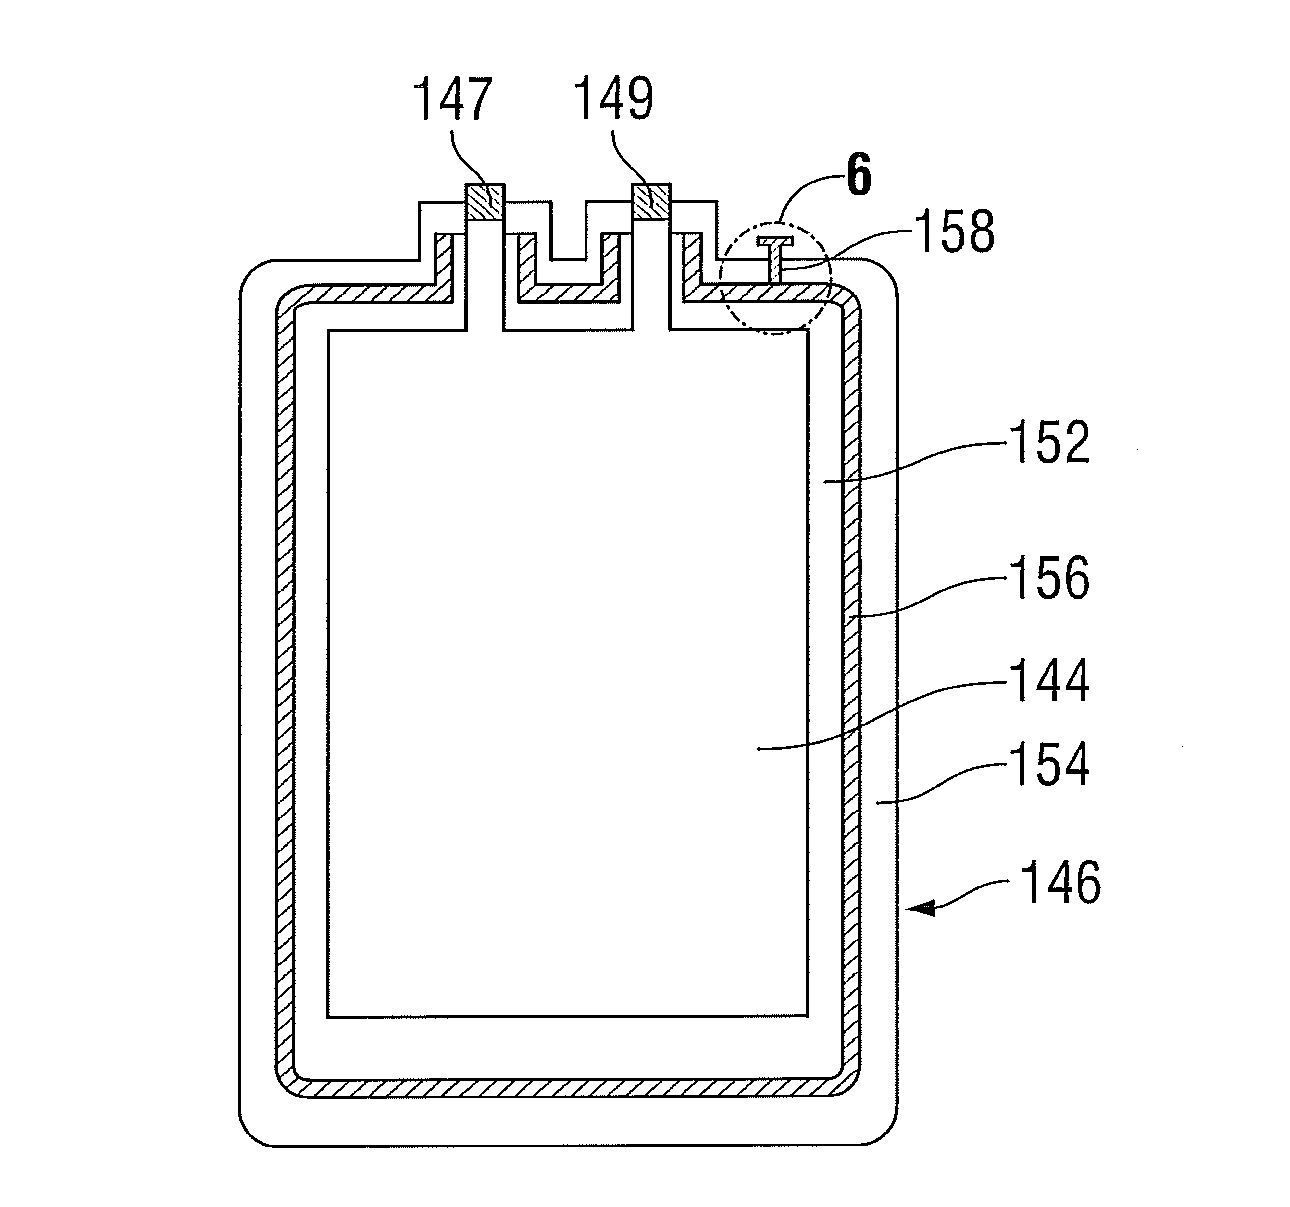 Devices, systems, and methods for battery cell fault detection